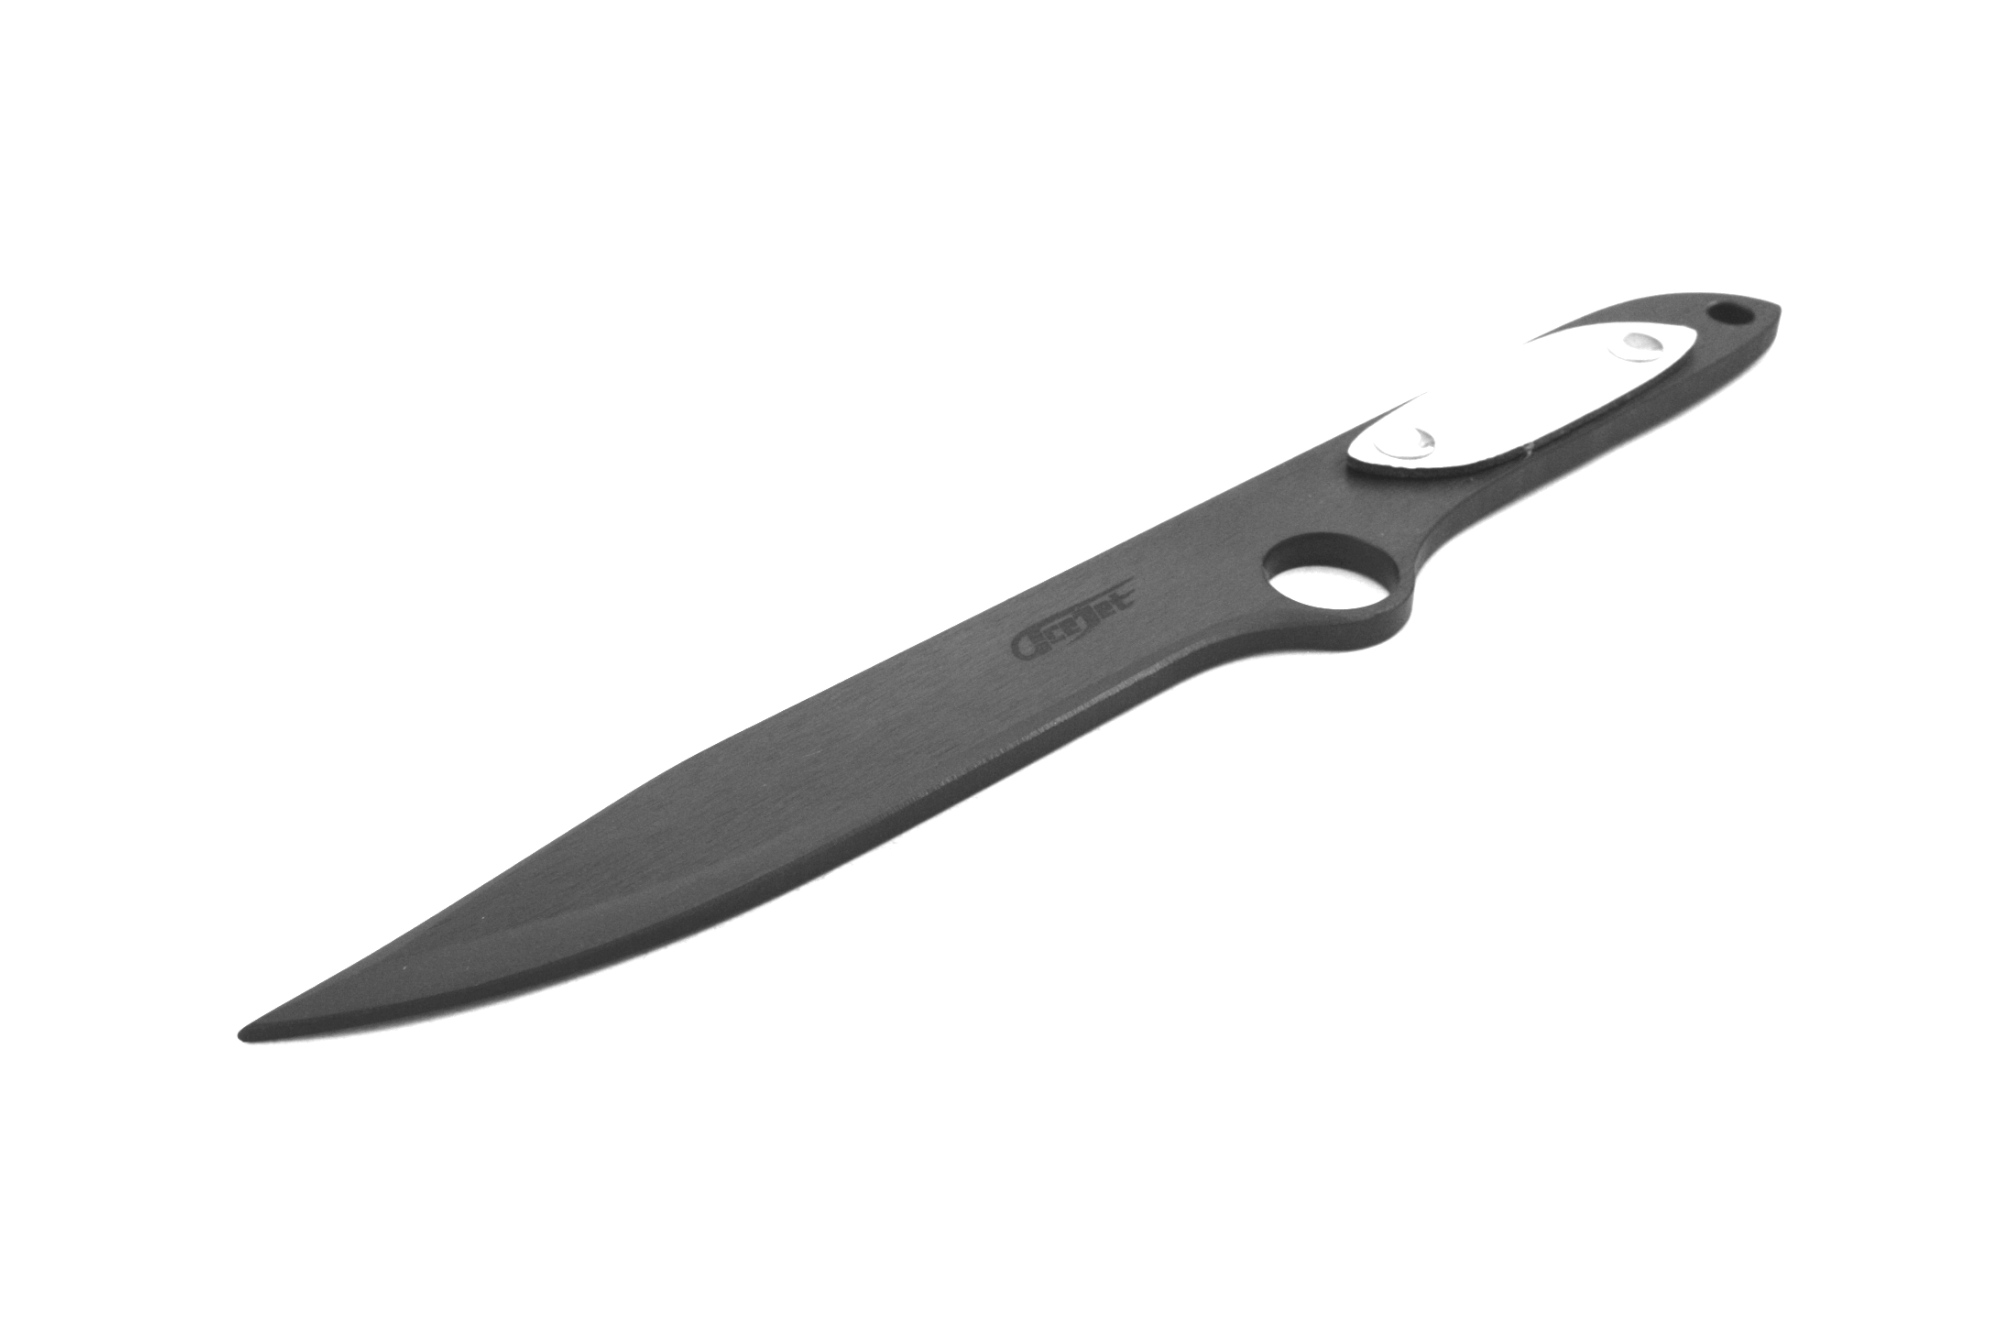 ACEJET SPINNER BOWIE Shadow Hunter - Throwing knife